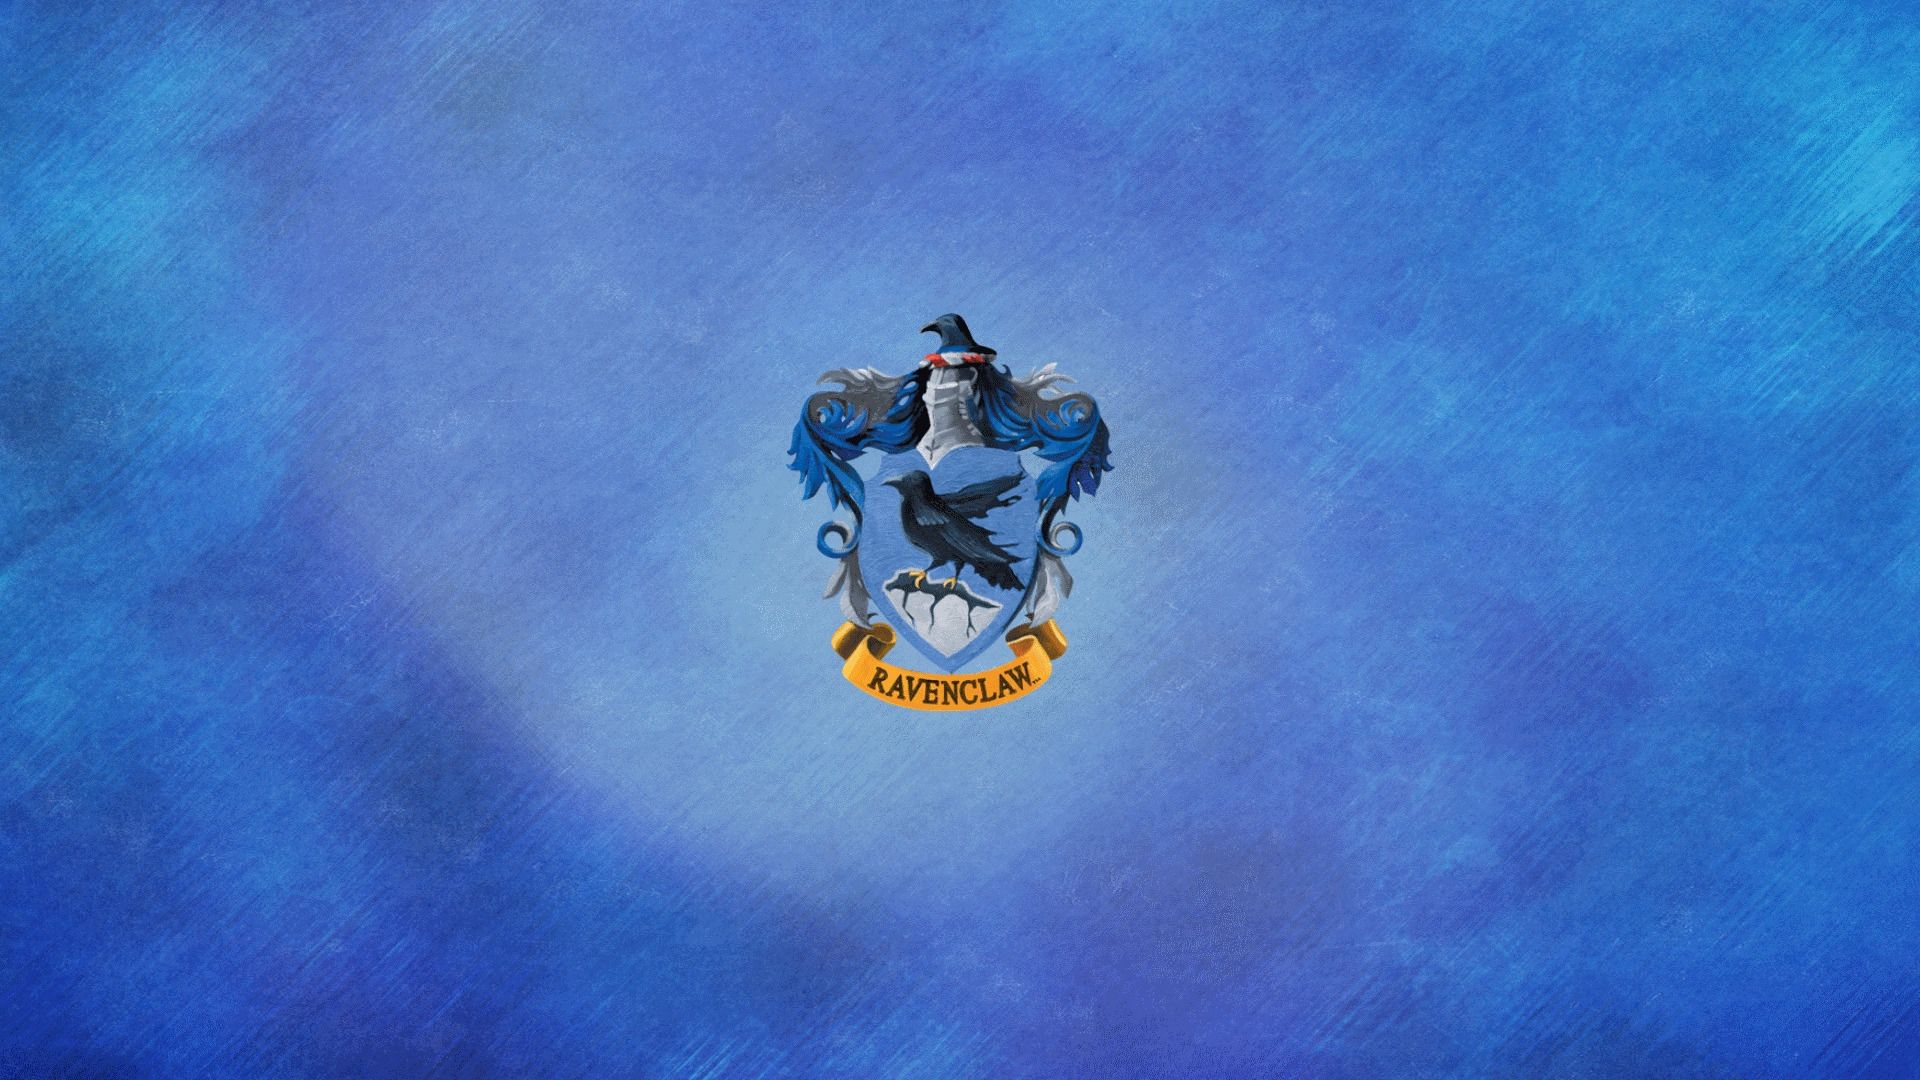 Download wallpaper Wallpaper, ravenclaw, 1920x Harry Potter, franchise, Ravenclaw, garry potter, section minimalism in resolution 1920x1080